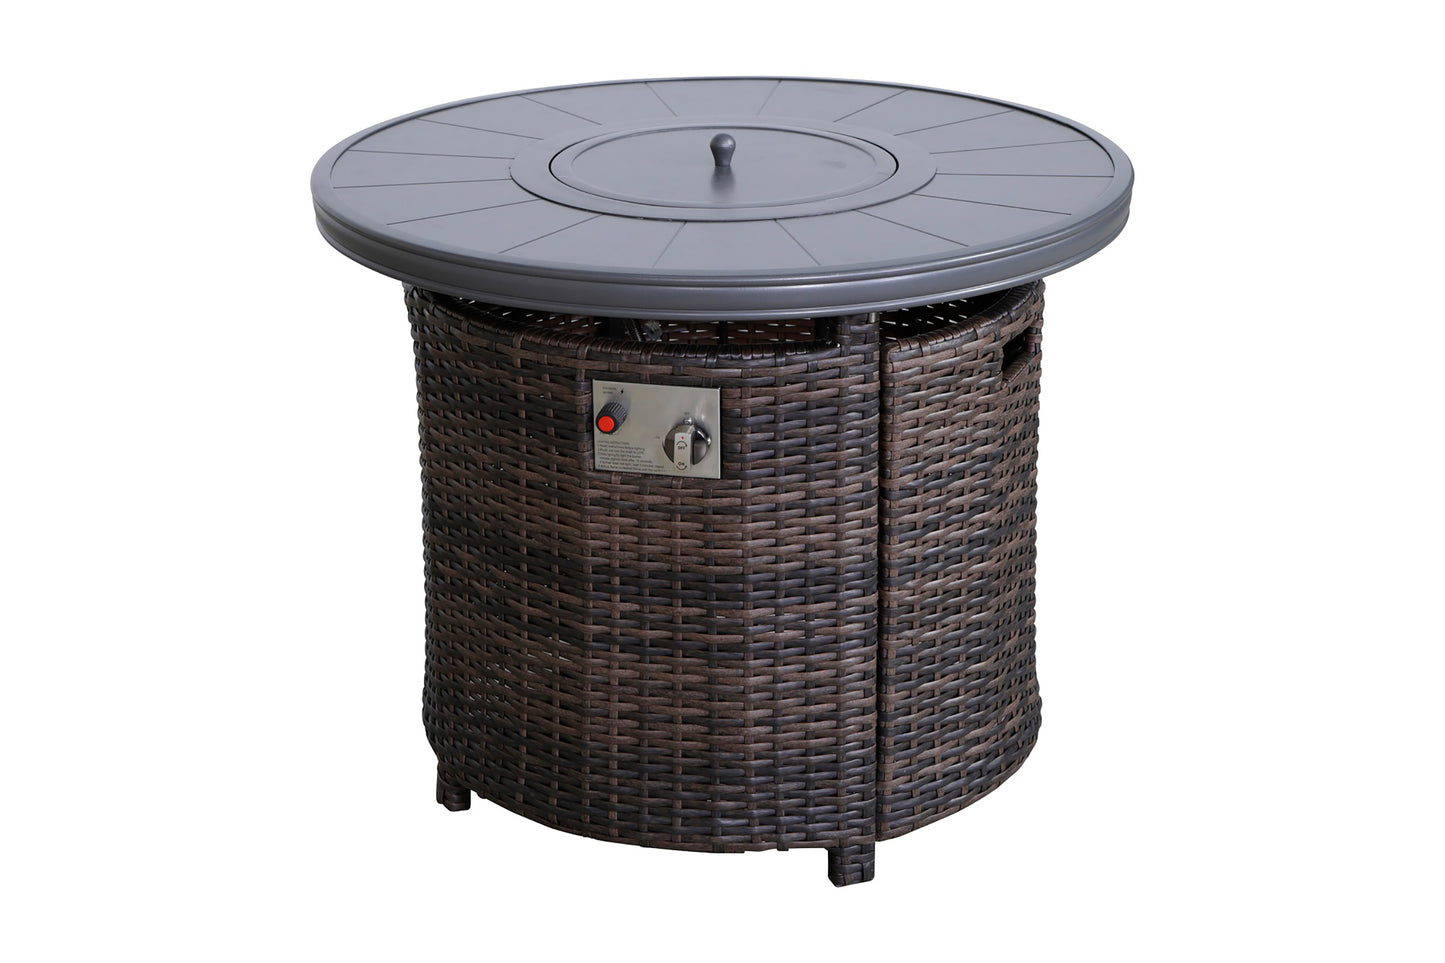 Aluminum and Wicker Outdoor Fire Pit Table with Hidden Propane Tank (Espresso)